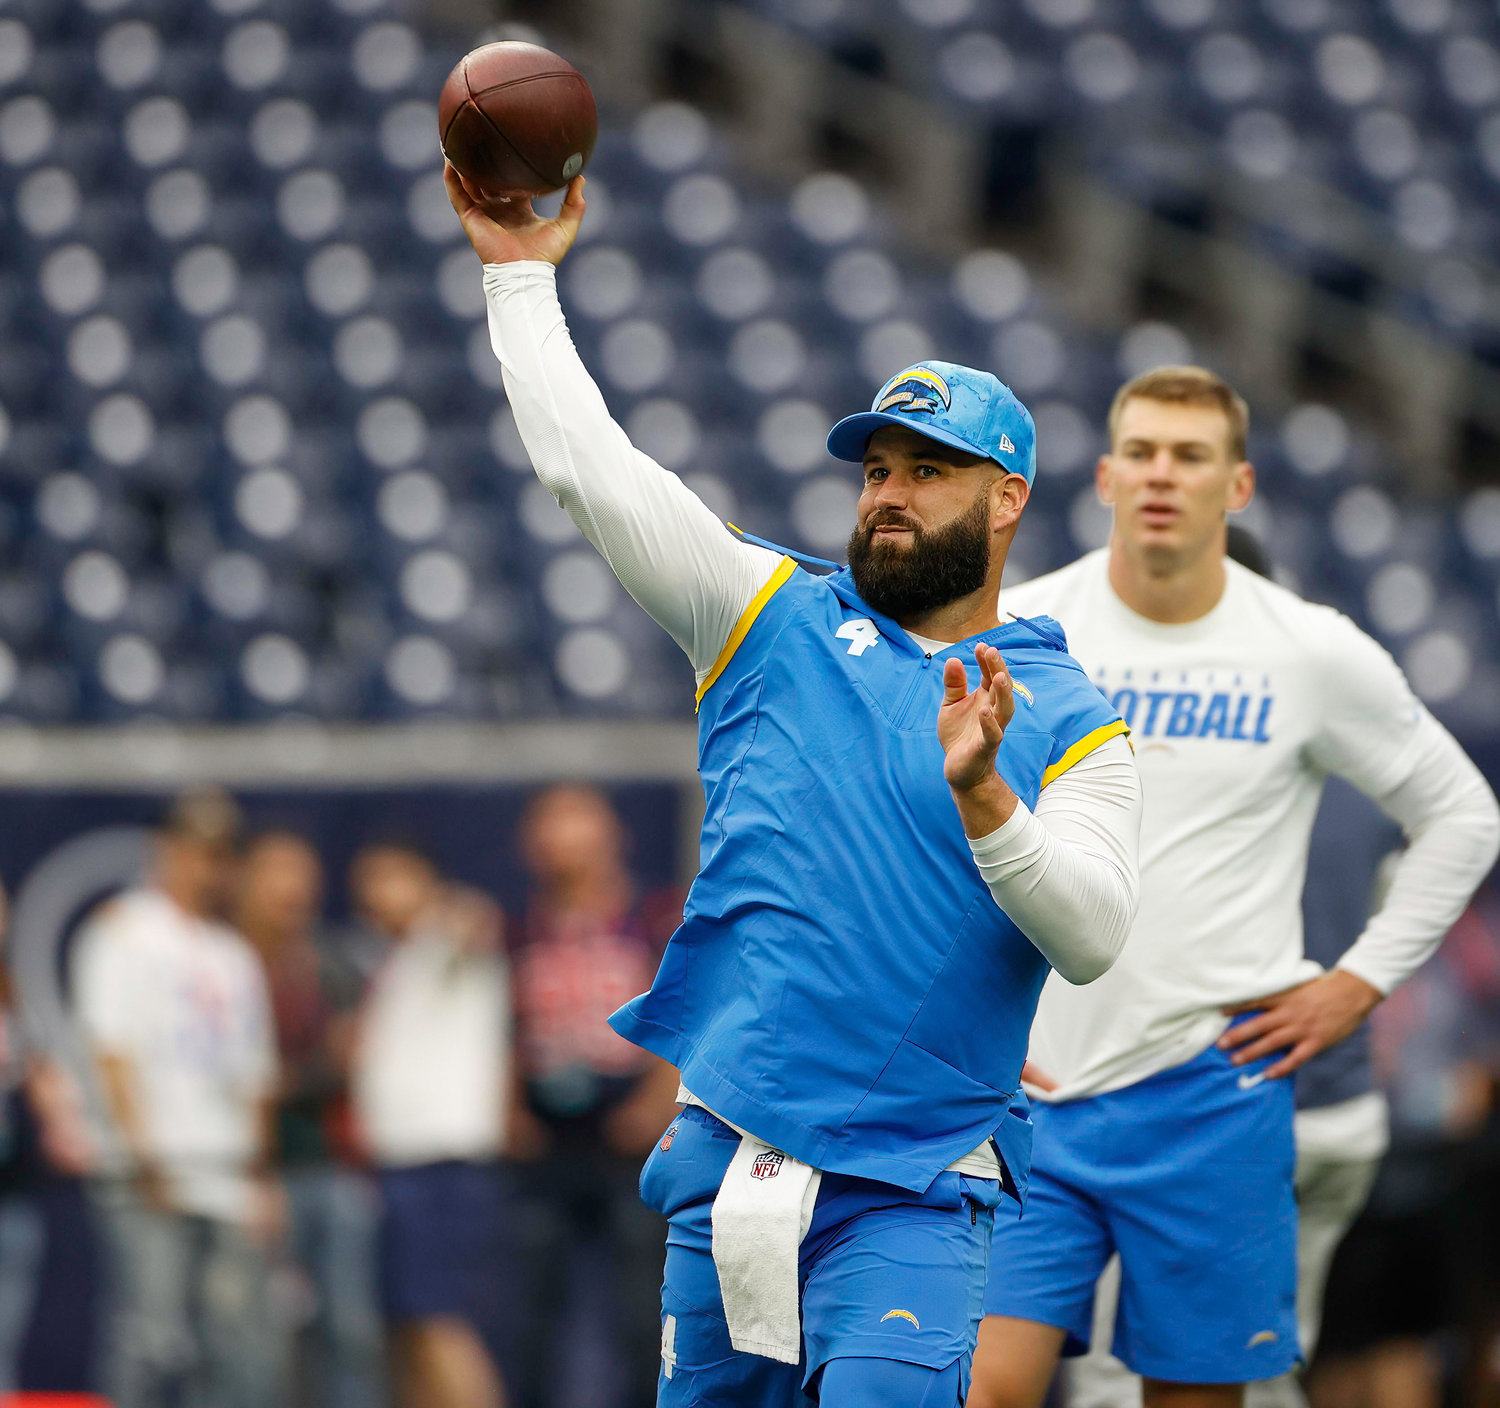 Chargers quarterback Chase Daniel (4) throws during warmups as quarterback Easton Stick (2) looks on before the start of an NFL game between the Texans and the Chargers on Oct. 2, 2022 in Houston.